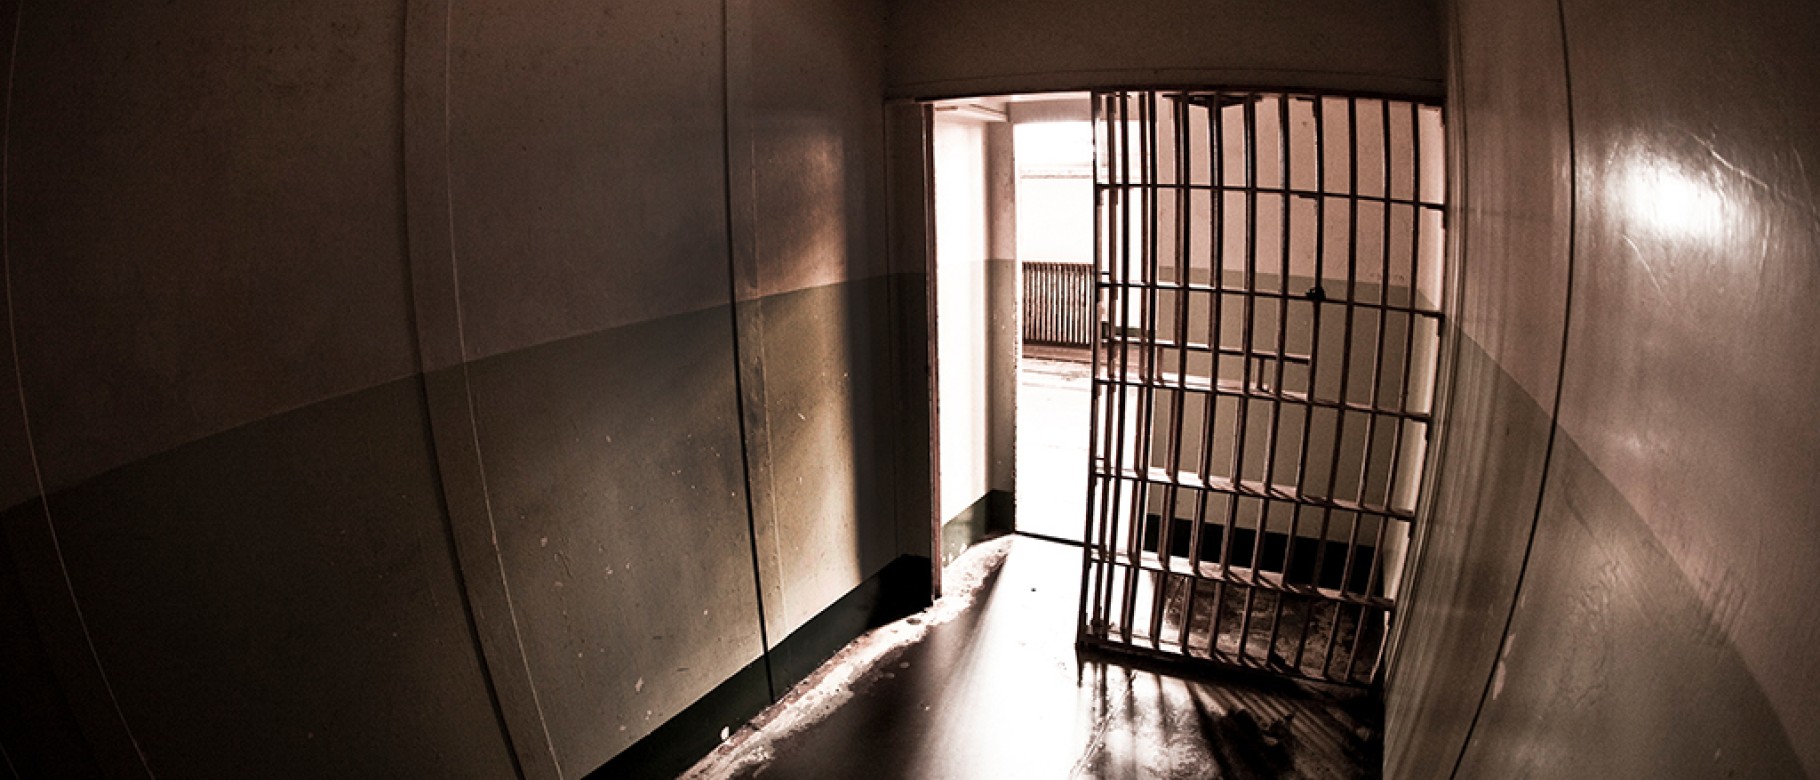 A dark photo shows the silhouette of a jail cell